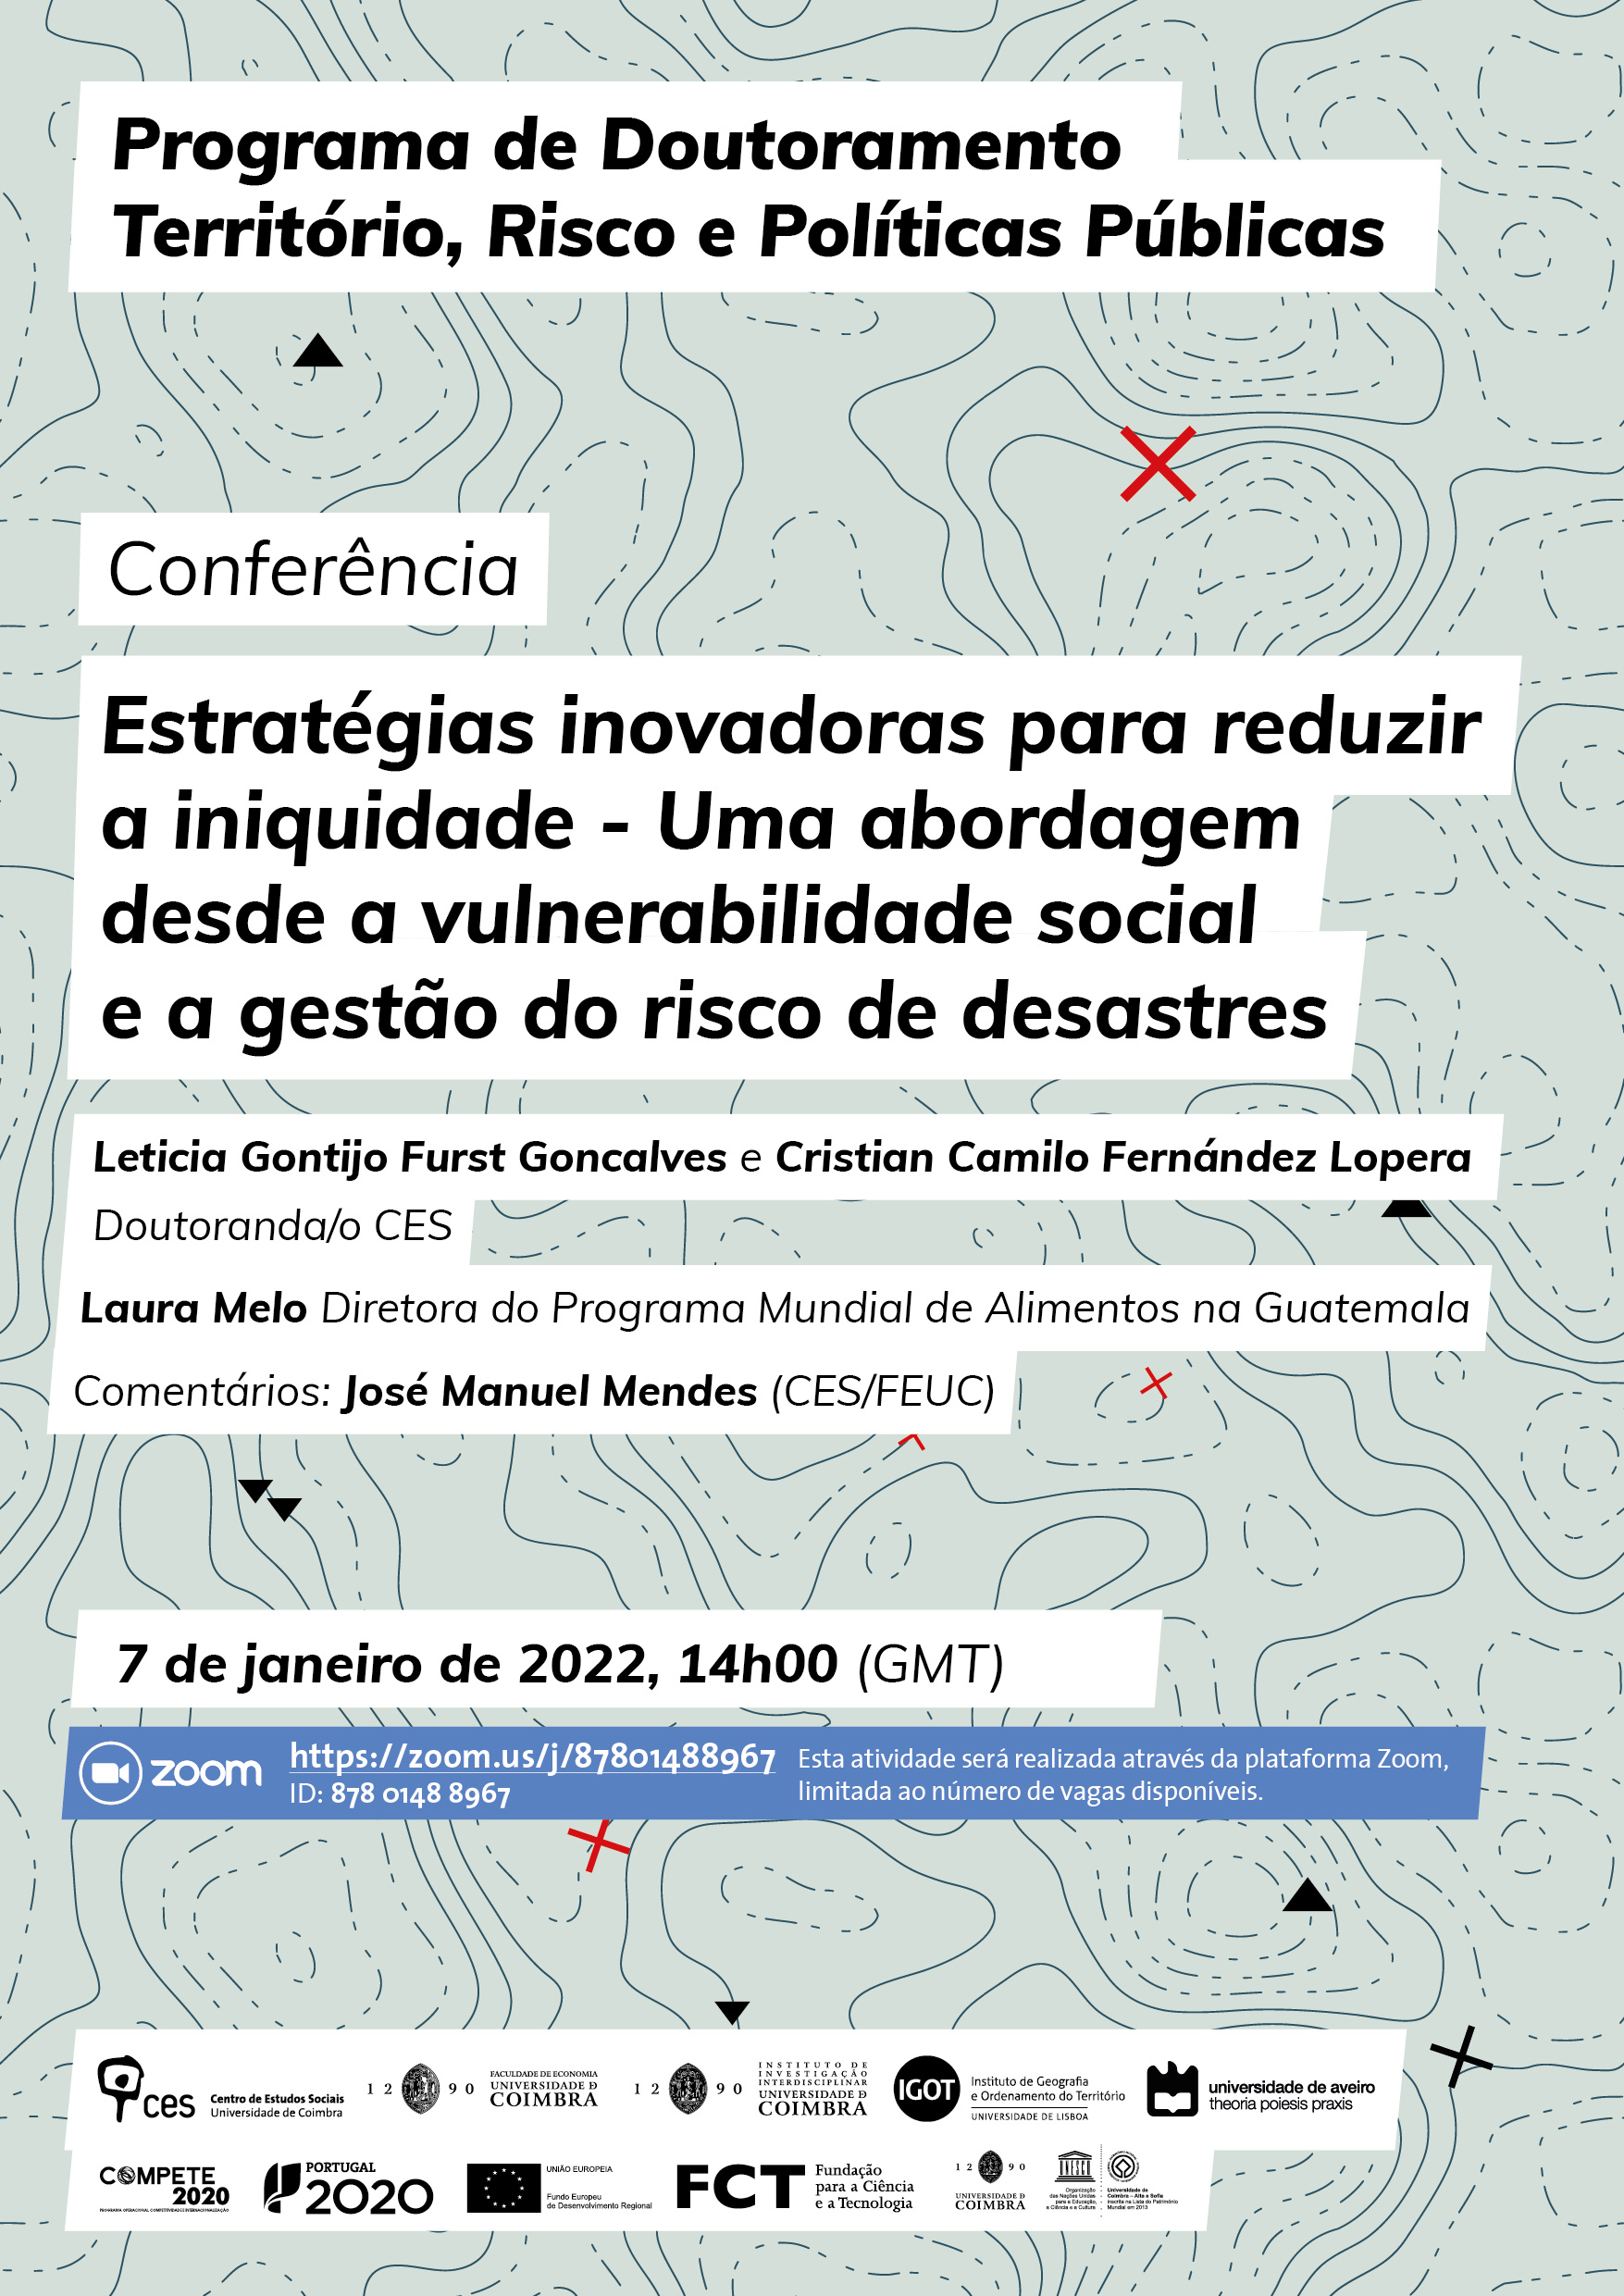 Innovative strategies to reduce inequity - An approach from social vulnerability and disaster risk management<span id="edit_36692"><script>$(function() { $('#edit_36692').load( "/myces/user/editobj.php?tipo=evento&id=36692" ); });</script></span>